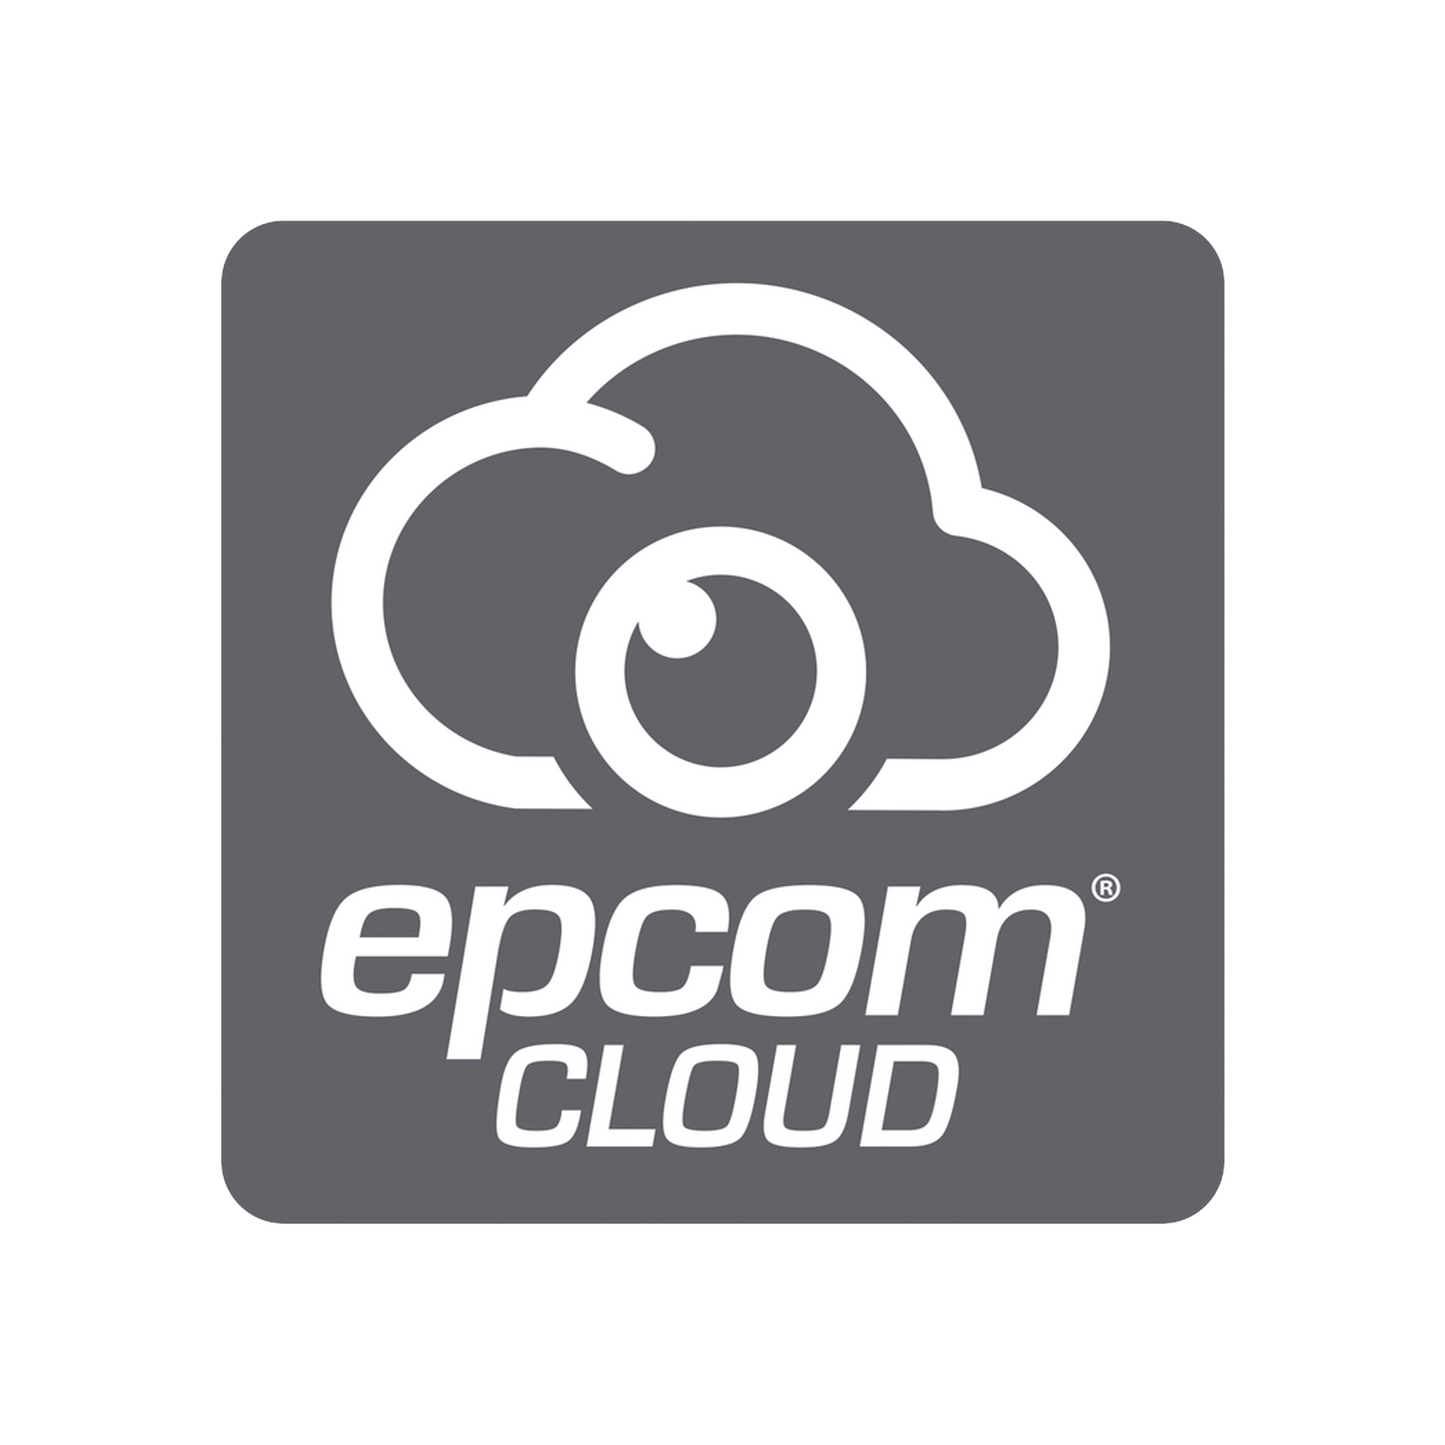 Epcom Cloud Annual Subscription / Cloud recording for 1 video channel at 8MP with 40 days retention / Continuous recording